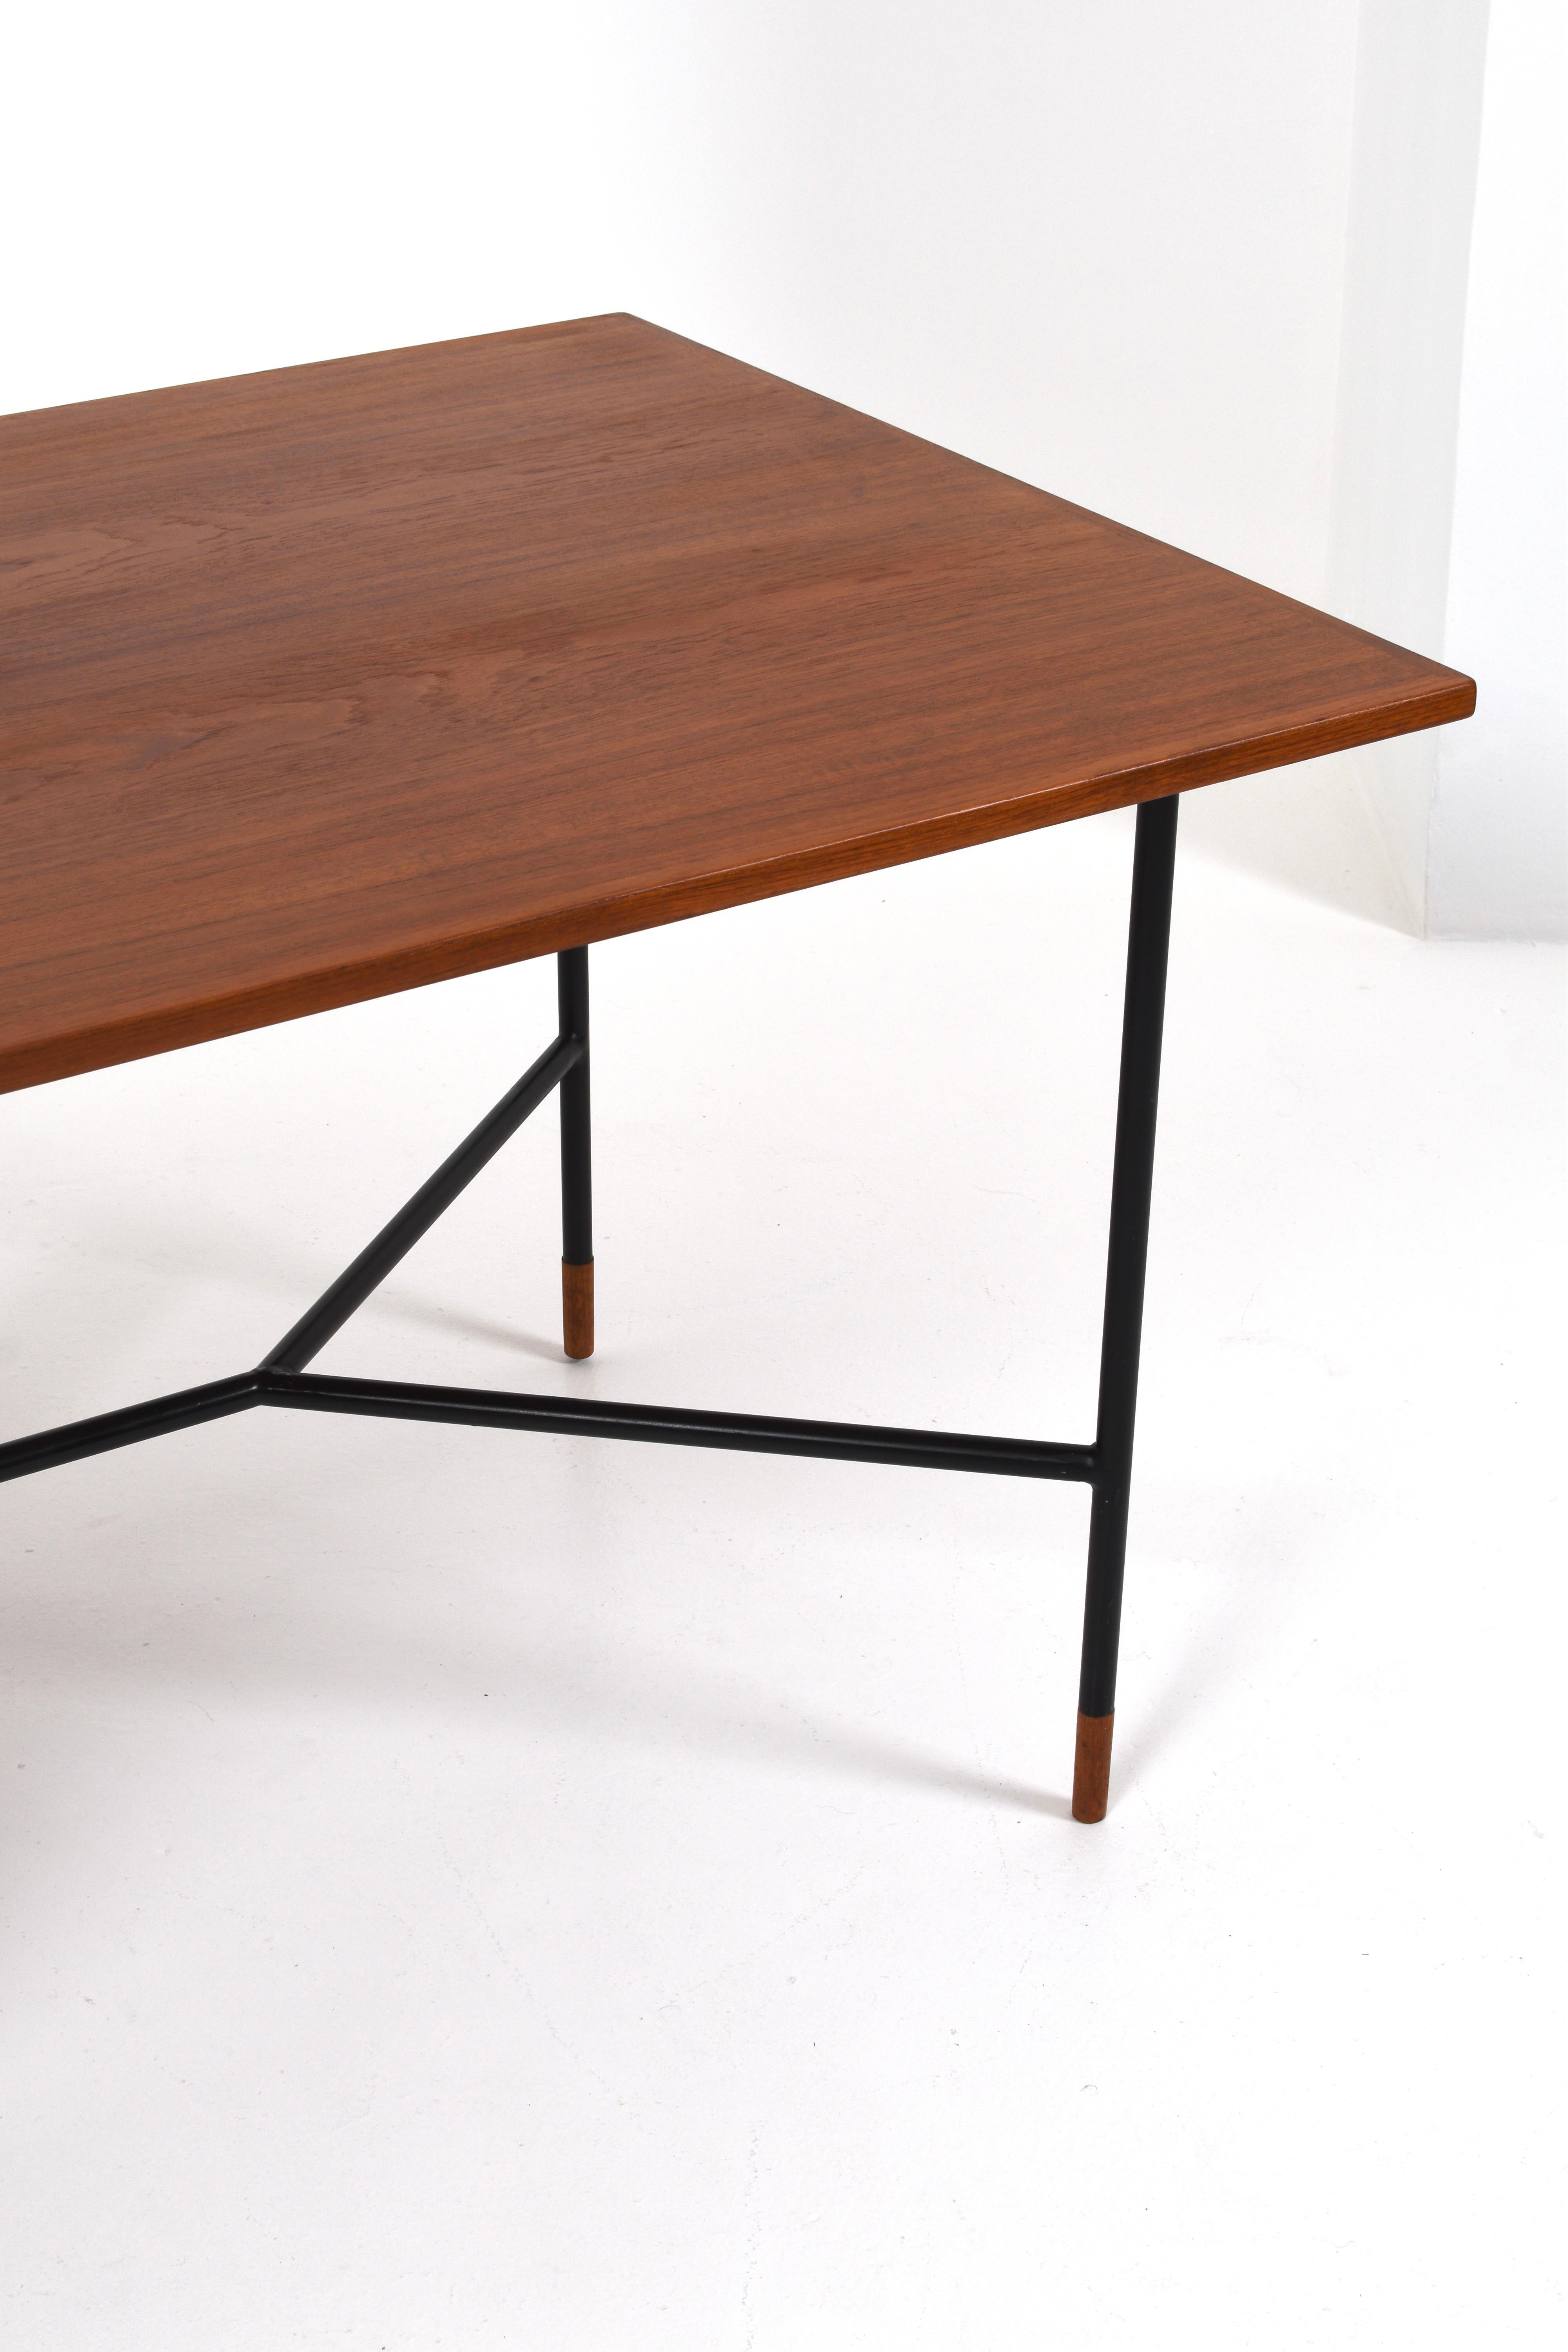 Mid-Century Modern Rare Desk H-55 by Åke Hassbjer in teak and steel base, 1950s For Sale